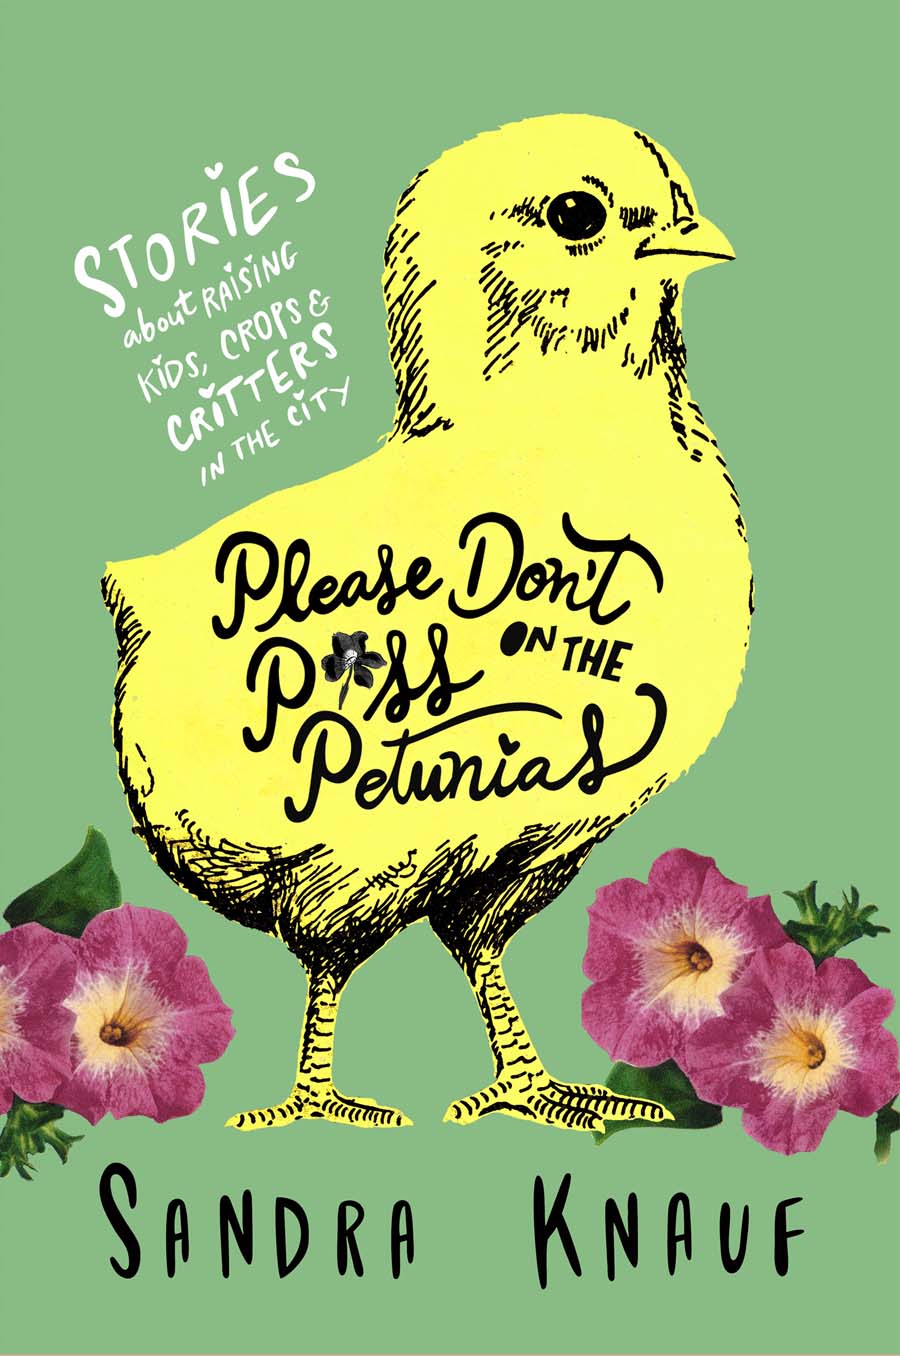 FREE: Please Don’t Piss on the Petunias: Stories About Raising Kids, Crops & Critters in the City by Sandra Knauf